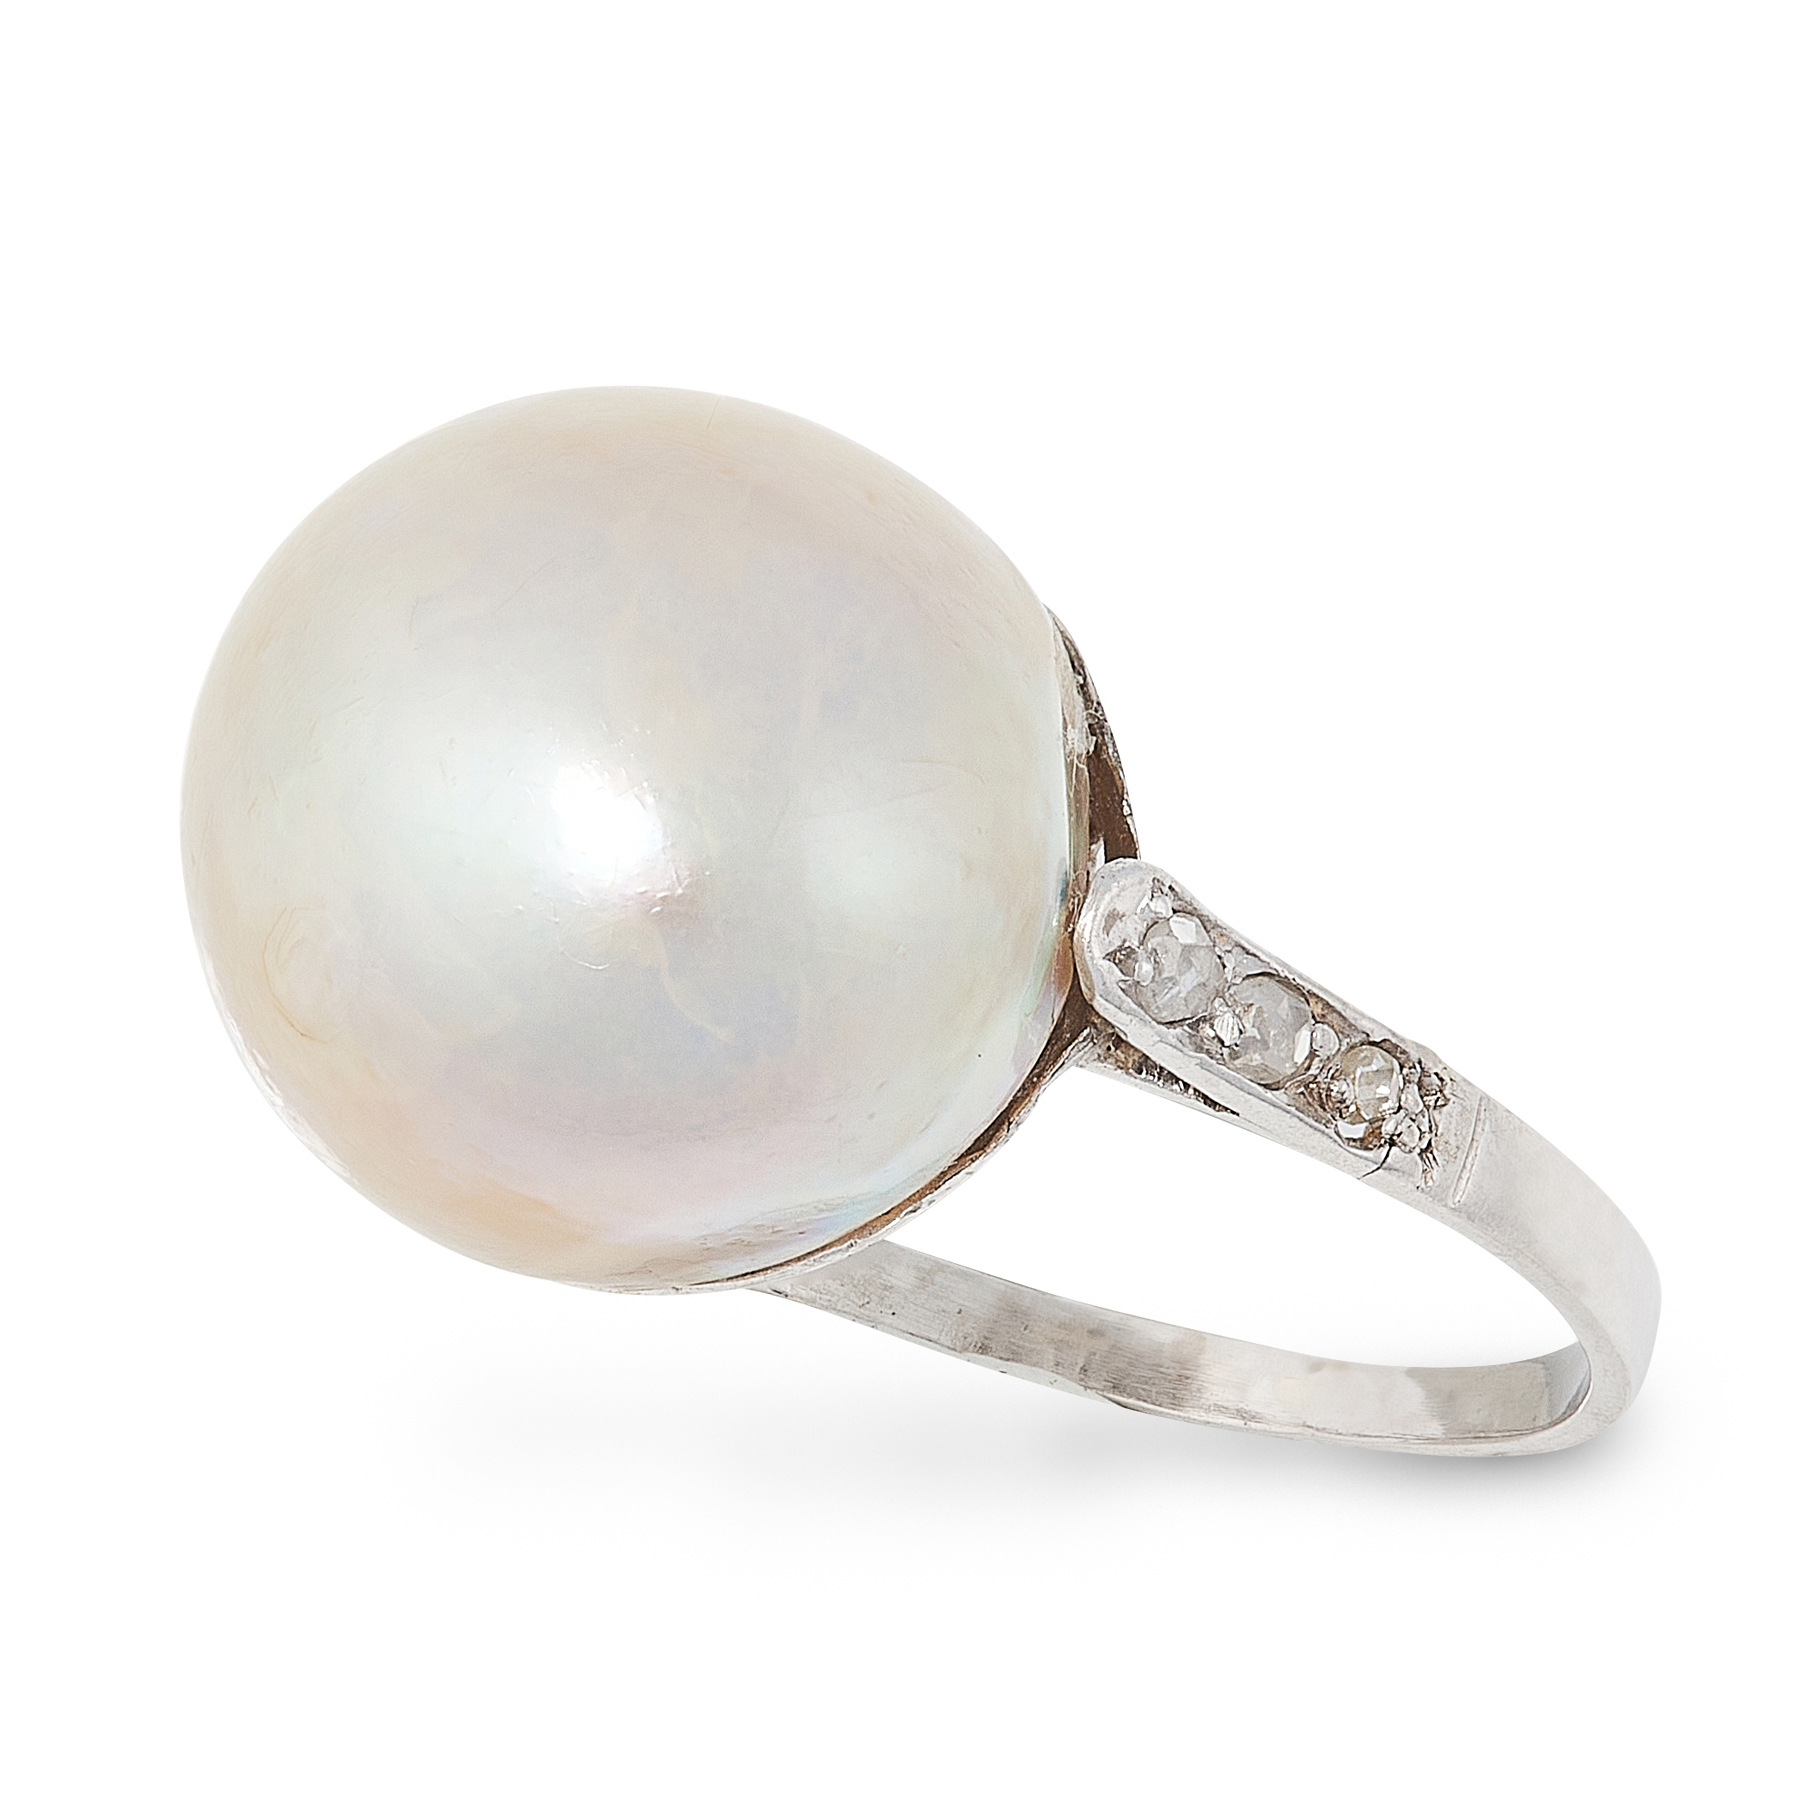 A PEARL AND DIAMOND DRESS RING, CIRCA 1930 set with a pearl of 12.8mm between shoulders accented - Image 2 of 2